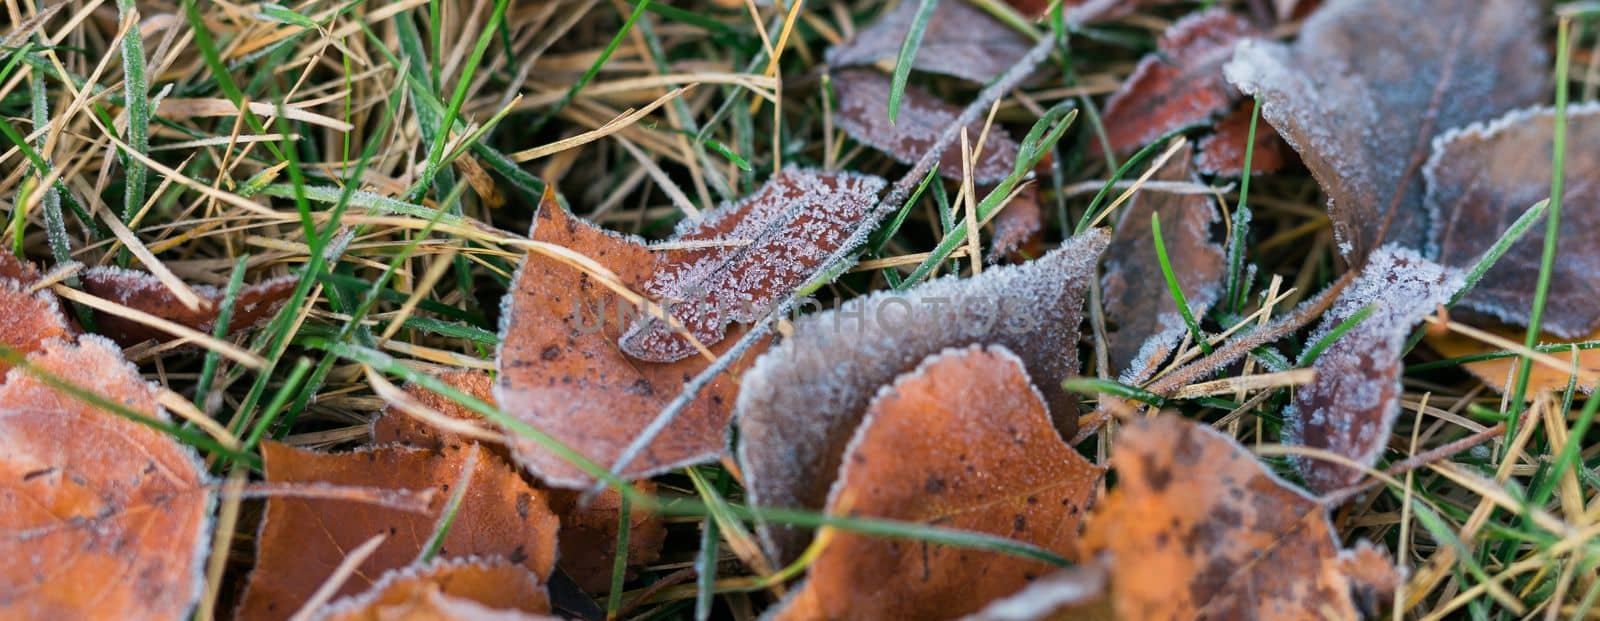 Frost on fallen leaves in late autumn or early winter, frost on grass at first frost - cold season